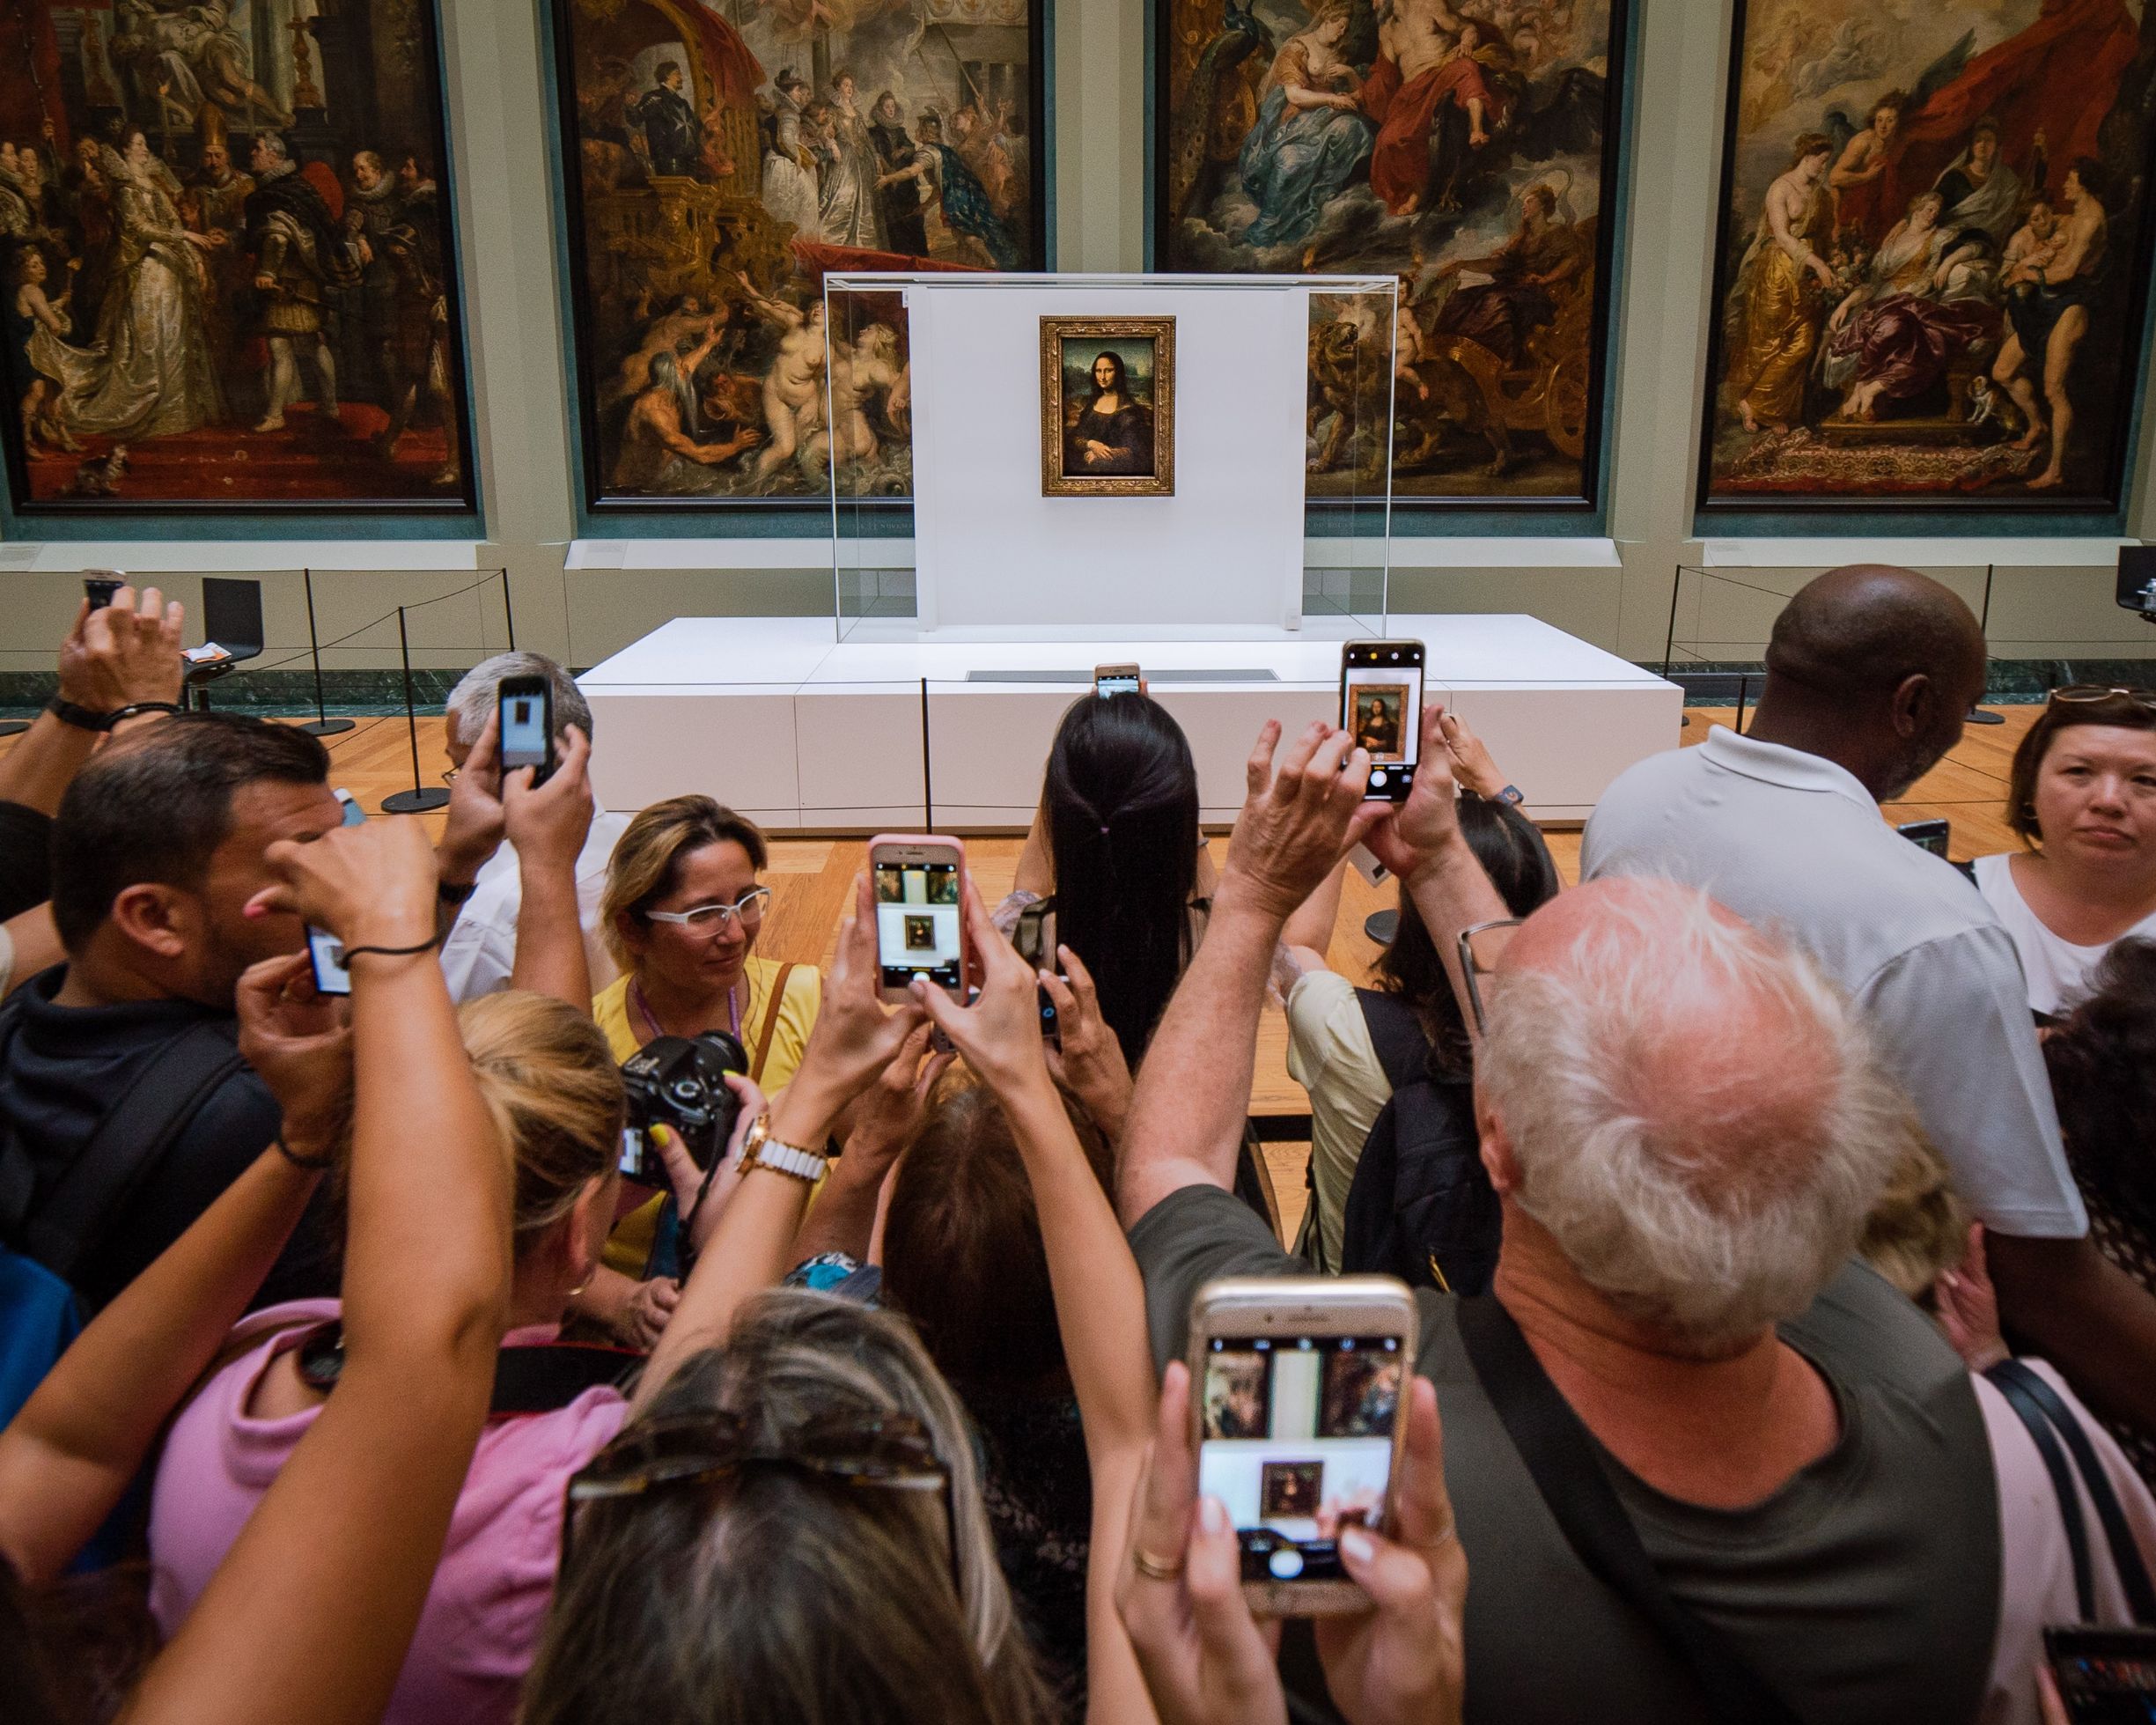 A crowd of tourists, taking photos of the Mona Lisa in the Louvre.